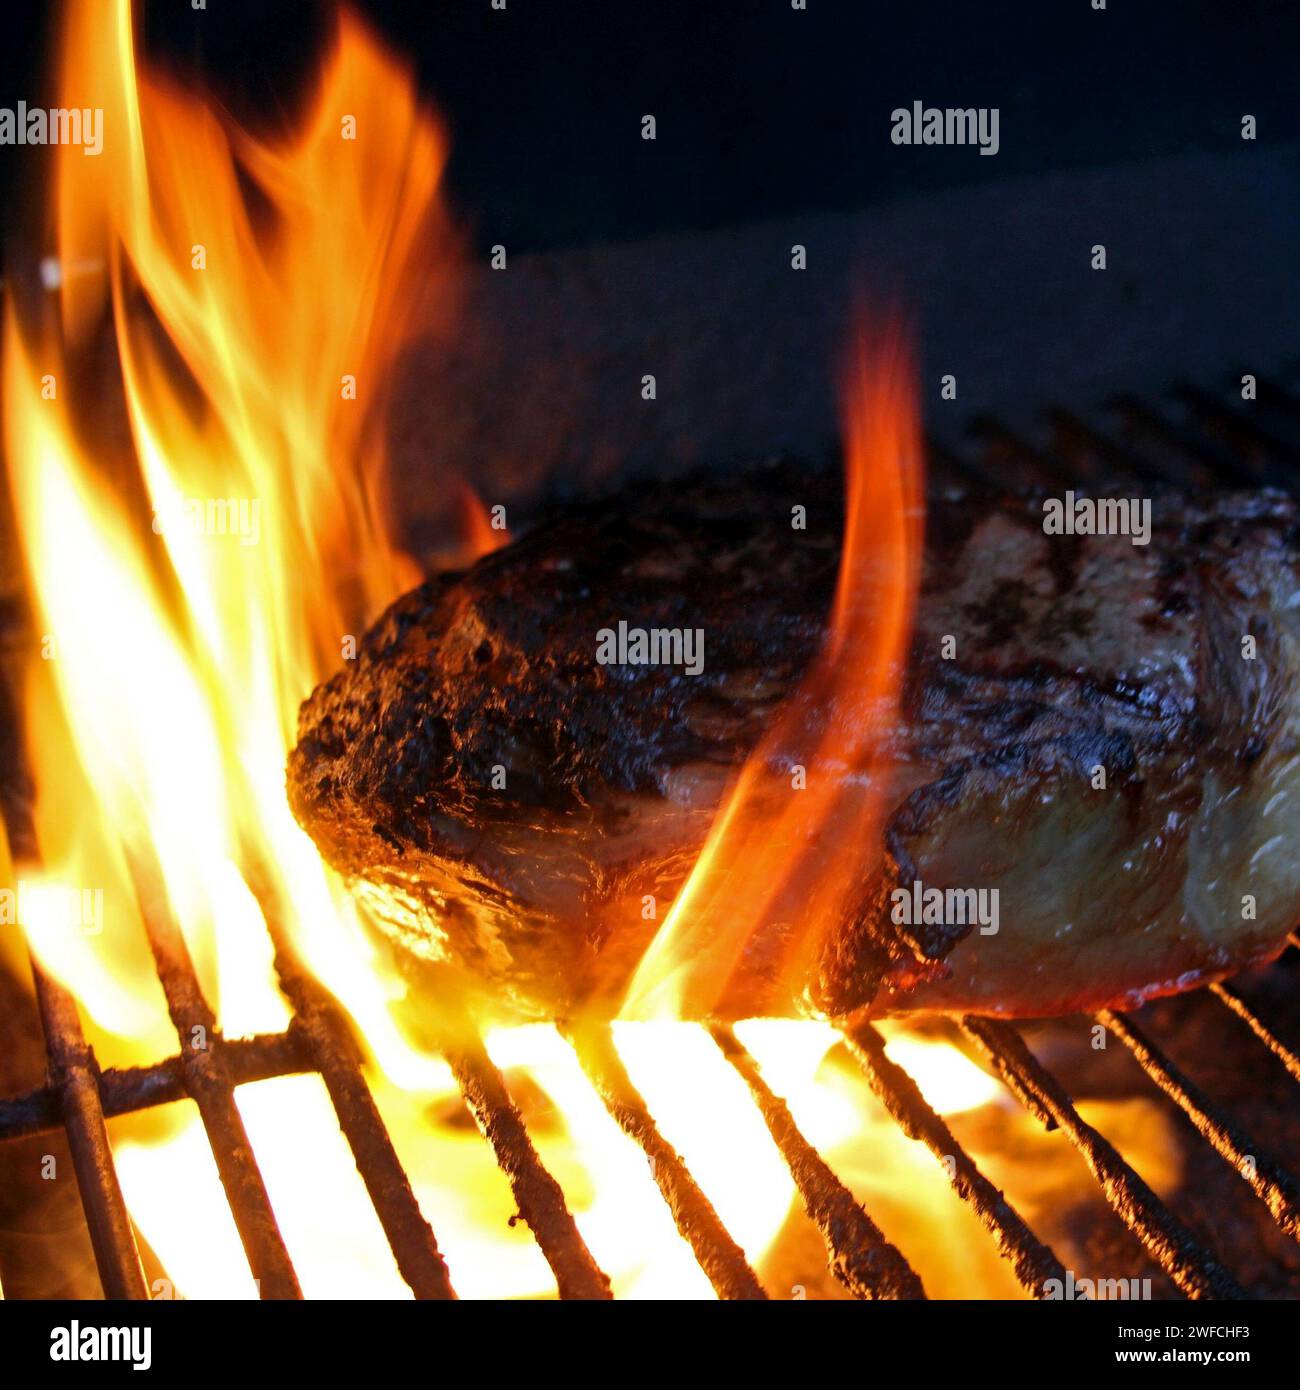 Rib eye on a grill, surrounded by flames. Searing the steak before cooking at a reduced temperature. Extra thick cut of ribeye steak on a grill top. Stock Photo